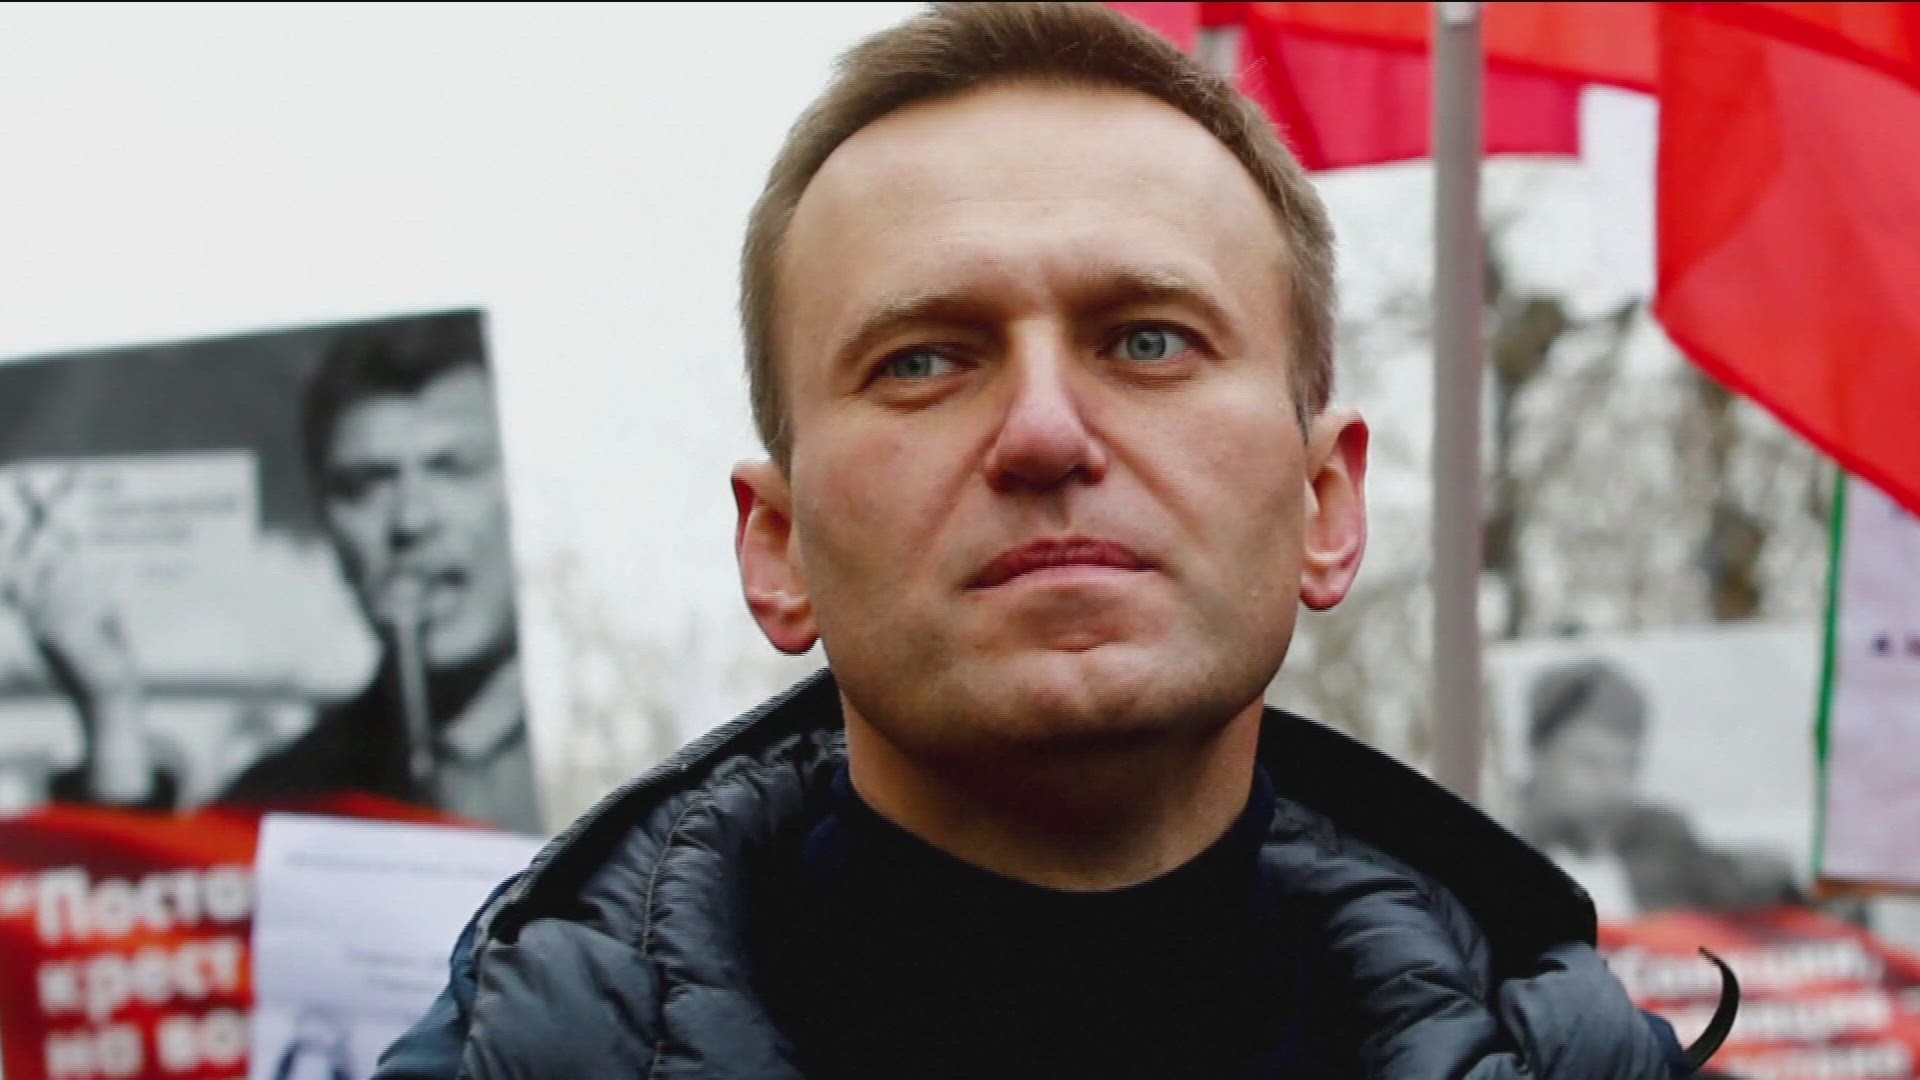 The stunning news of Navalny’s death comes less than a month before an election that will give Vladimir Putin another six years in power.